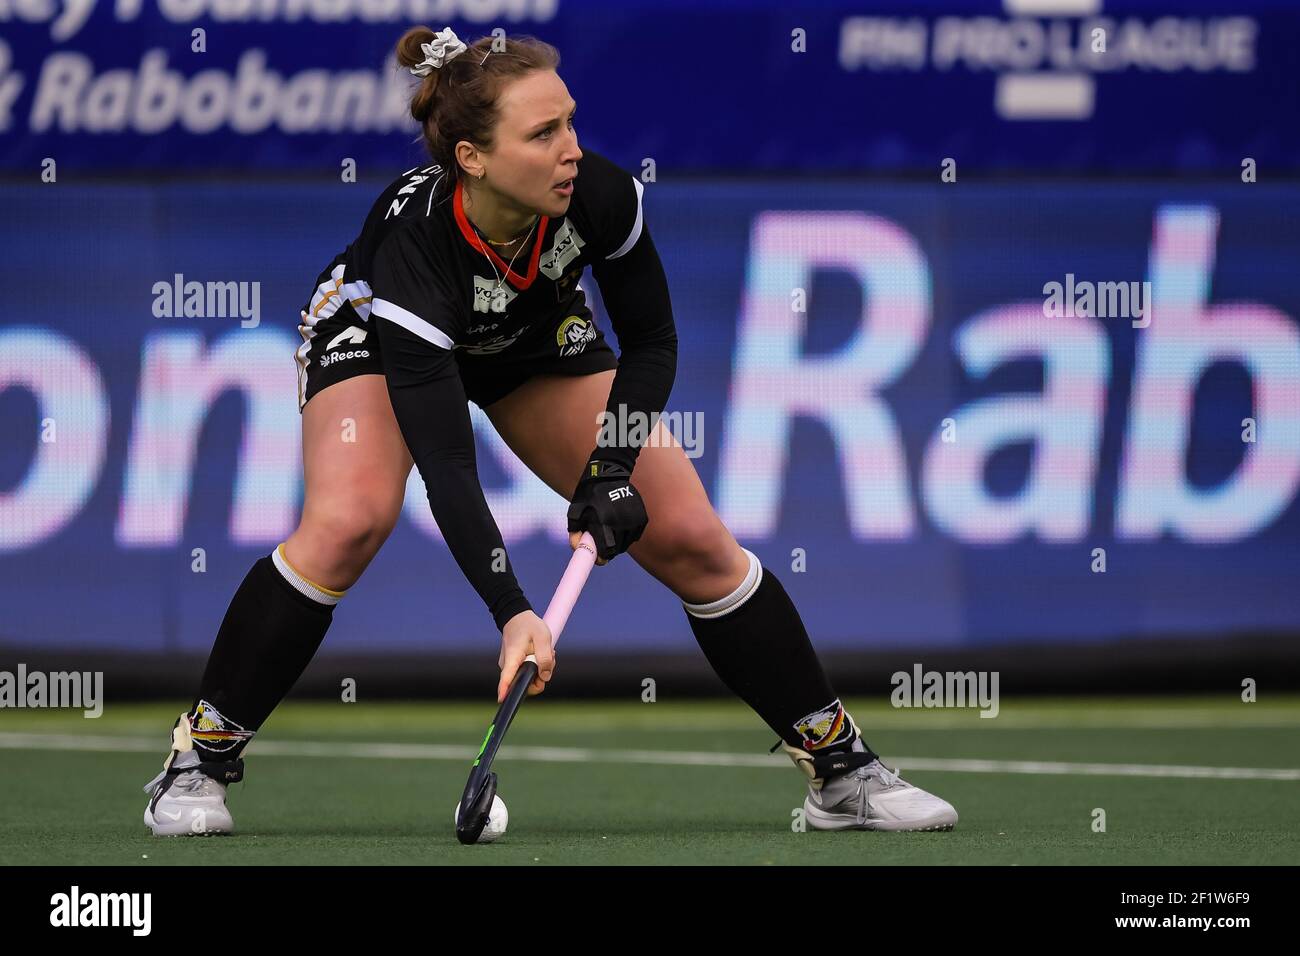 AMSTELVEEN, NETHERLANDS - MARCH 6: Nike Lorenz of Germany during the FIH Pro League match between Netherlands Women and Germany Women at Wagener Stadi Stock Photo